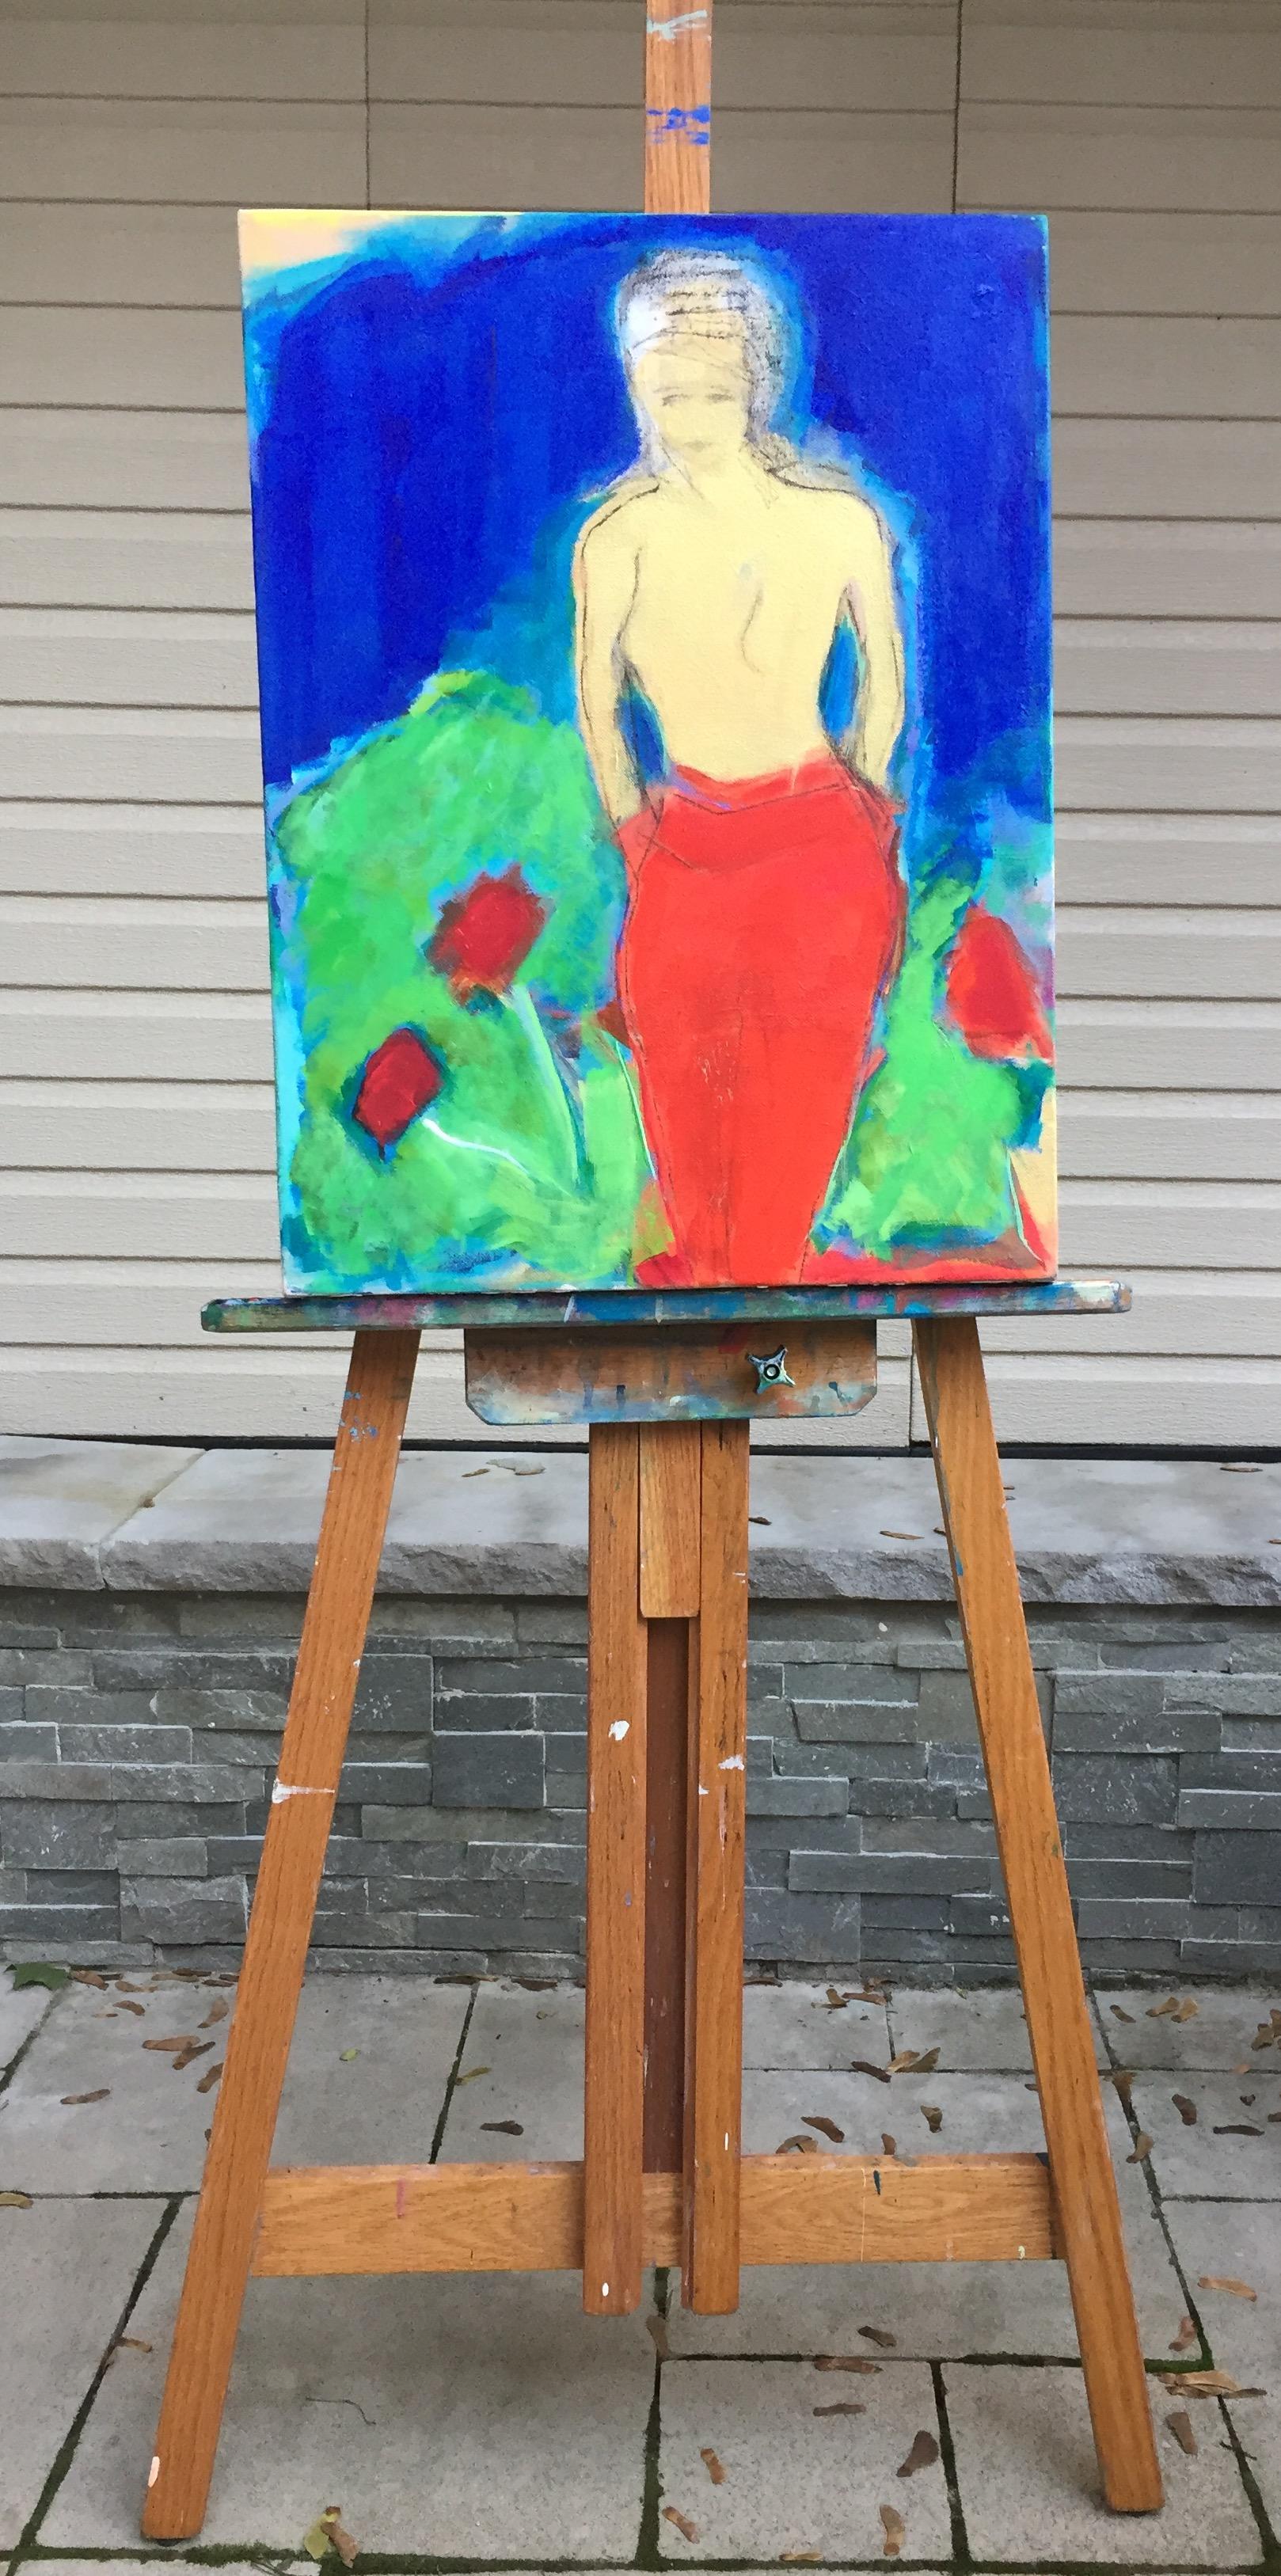 <p>Artist Comments<br>I spent some time in a sculpture garden in Austin, Texas this year. A beautiful mermaid sculpture was planted amid the trees, flora and water. When I stepped away from this painting I was happily reminded of her